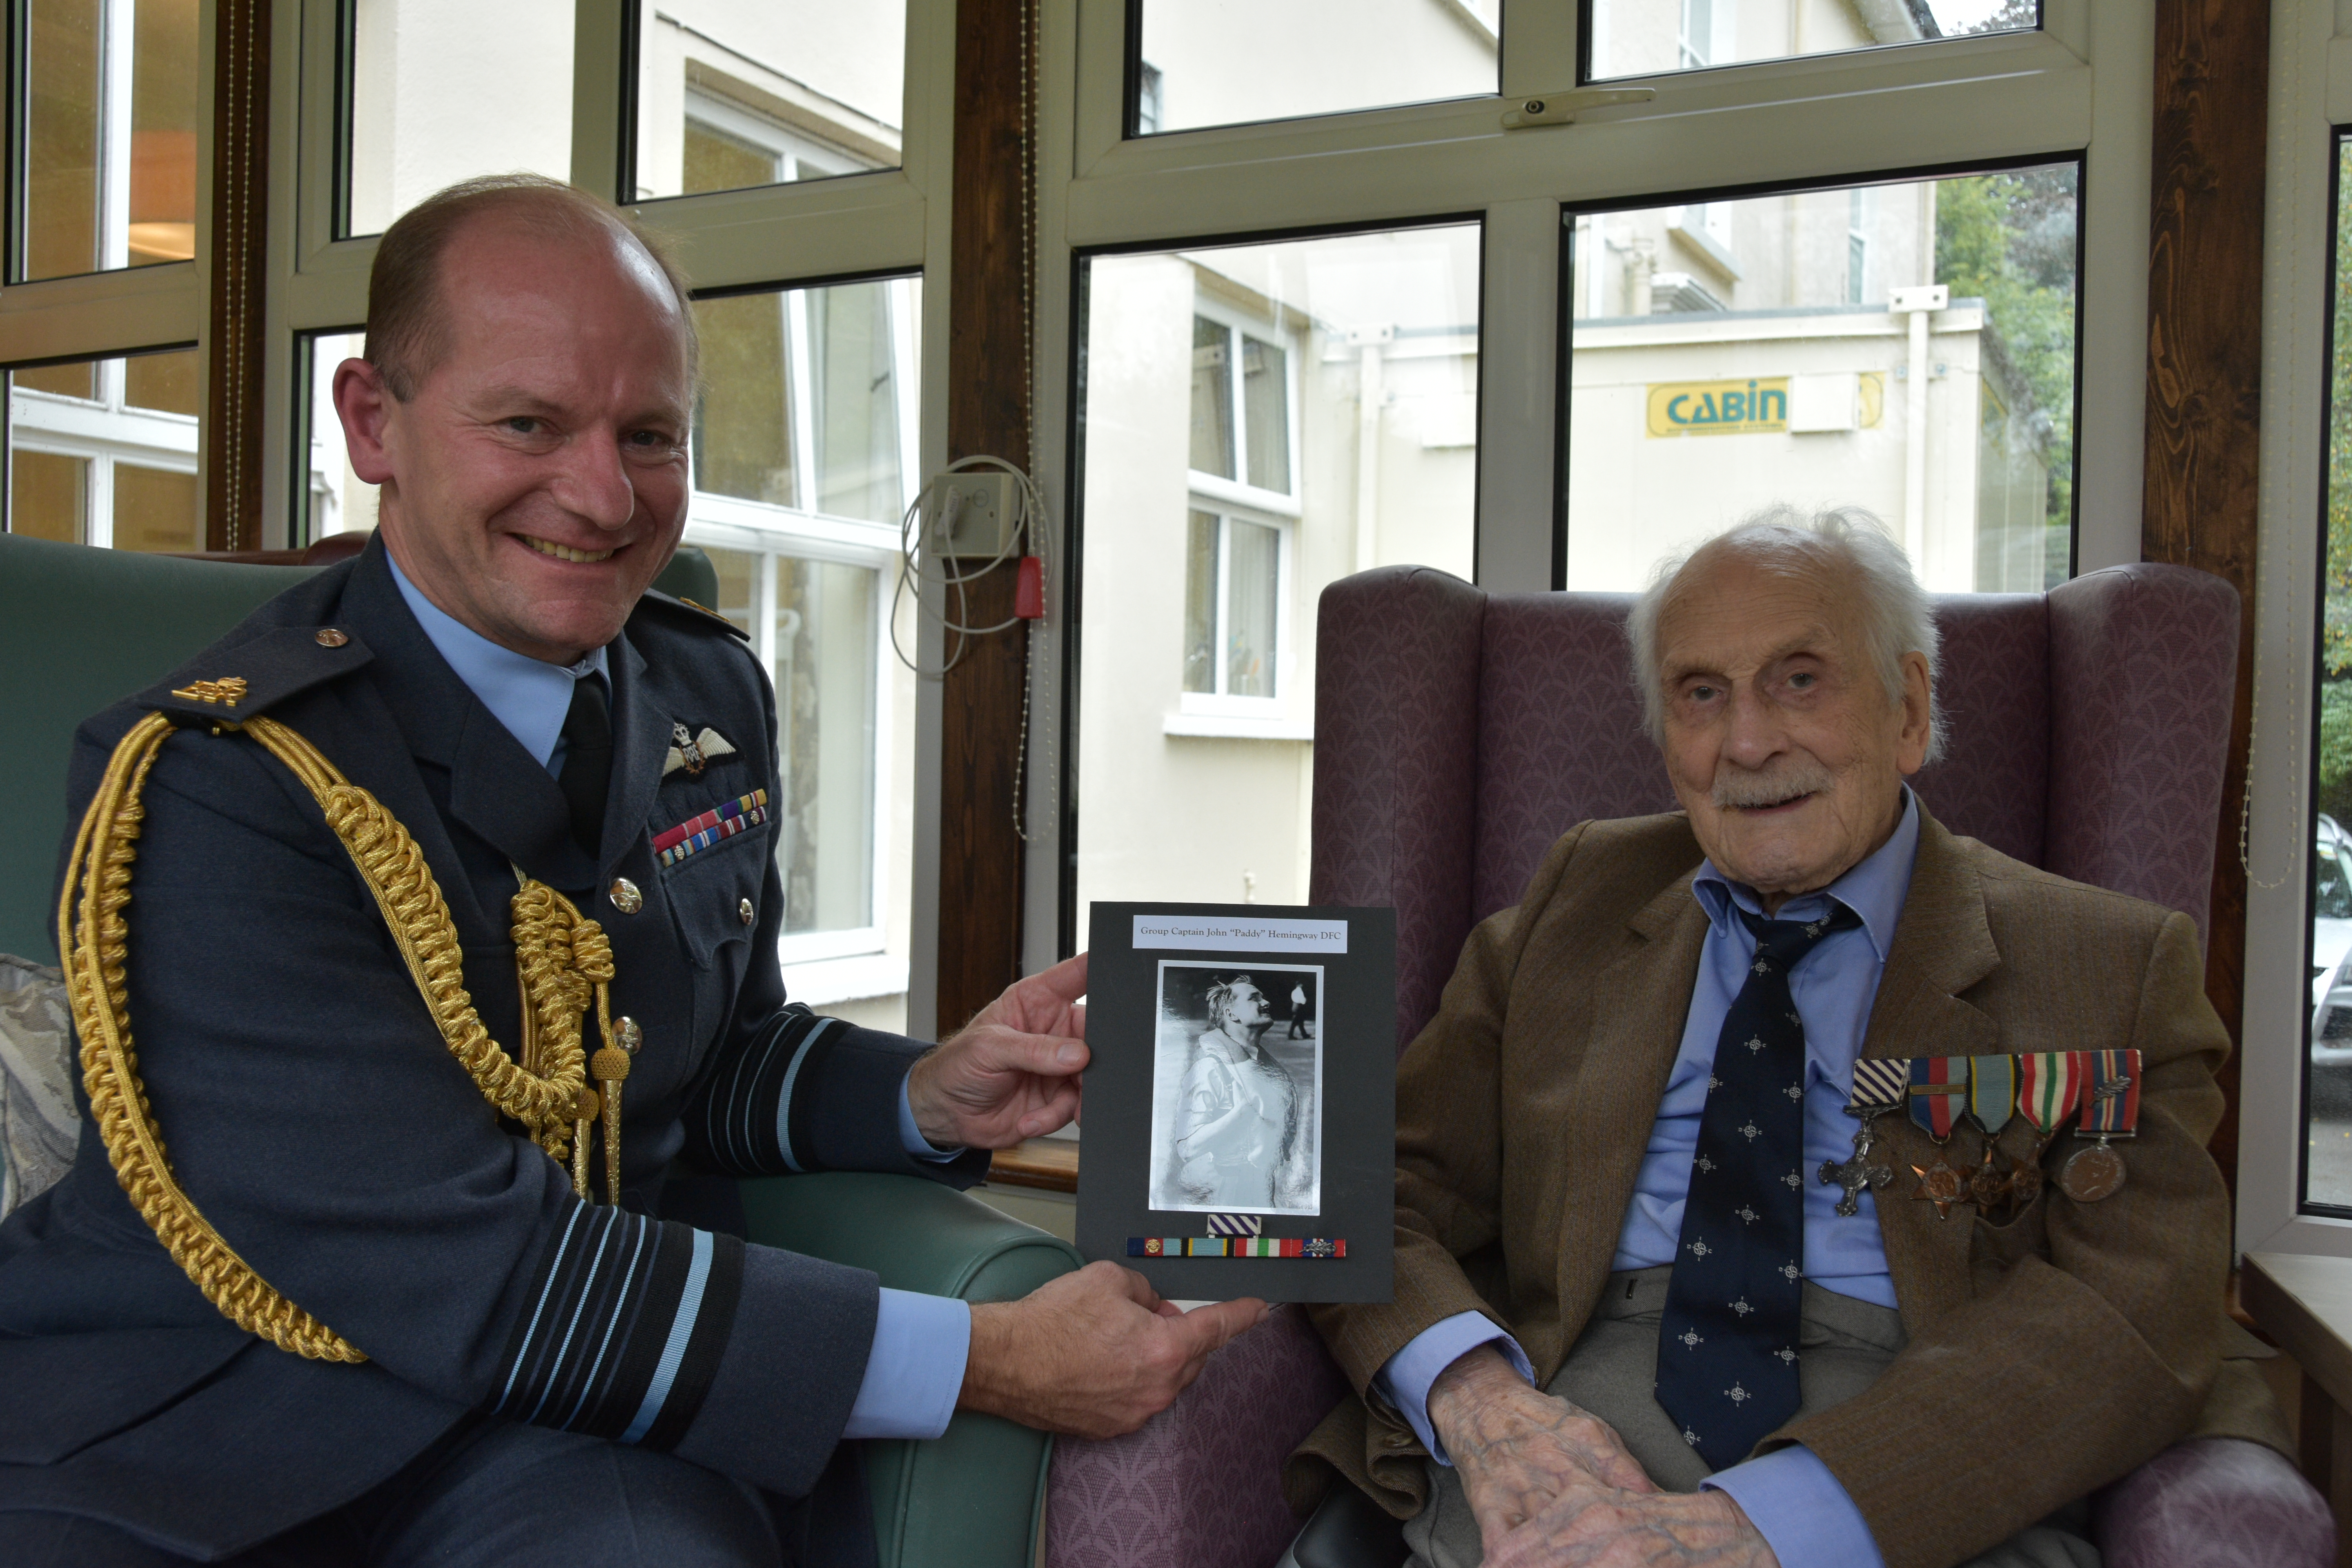 Group Captain (retired) John ‘Paddy’ Hemingway and Air Chief Marshal Sir Mike Wigston holding black and white picture.